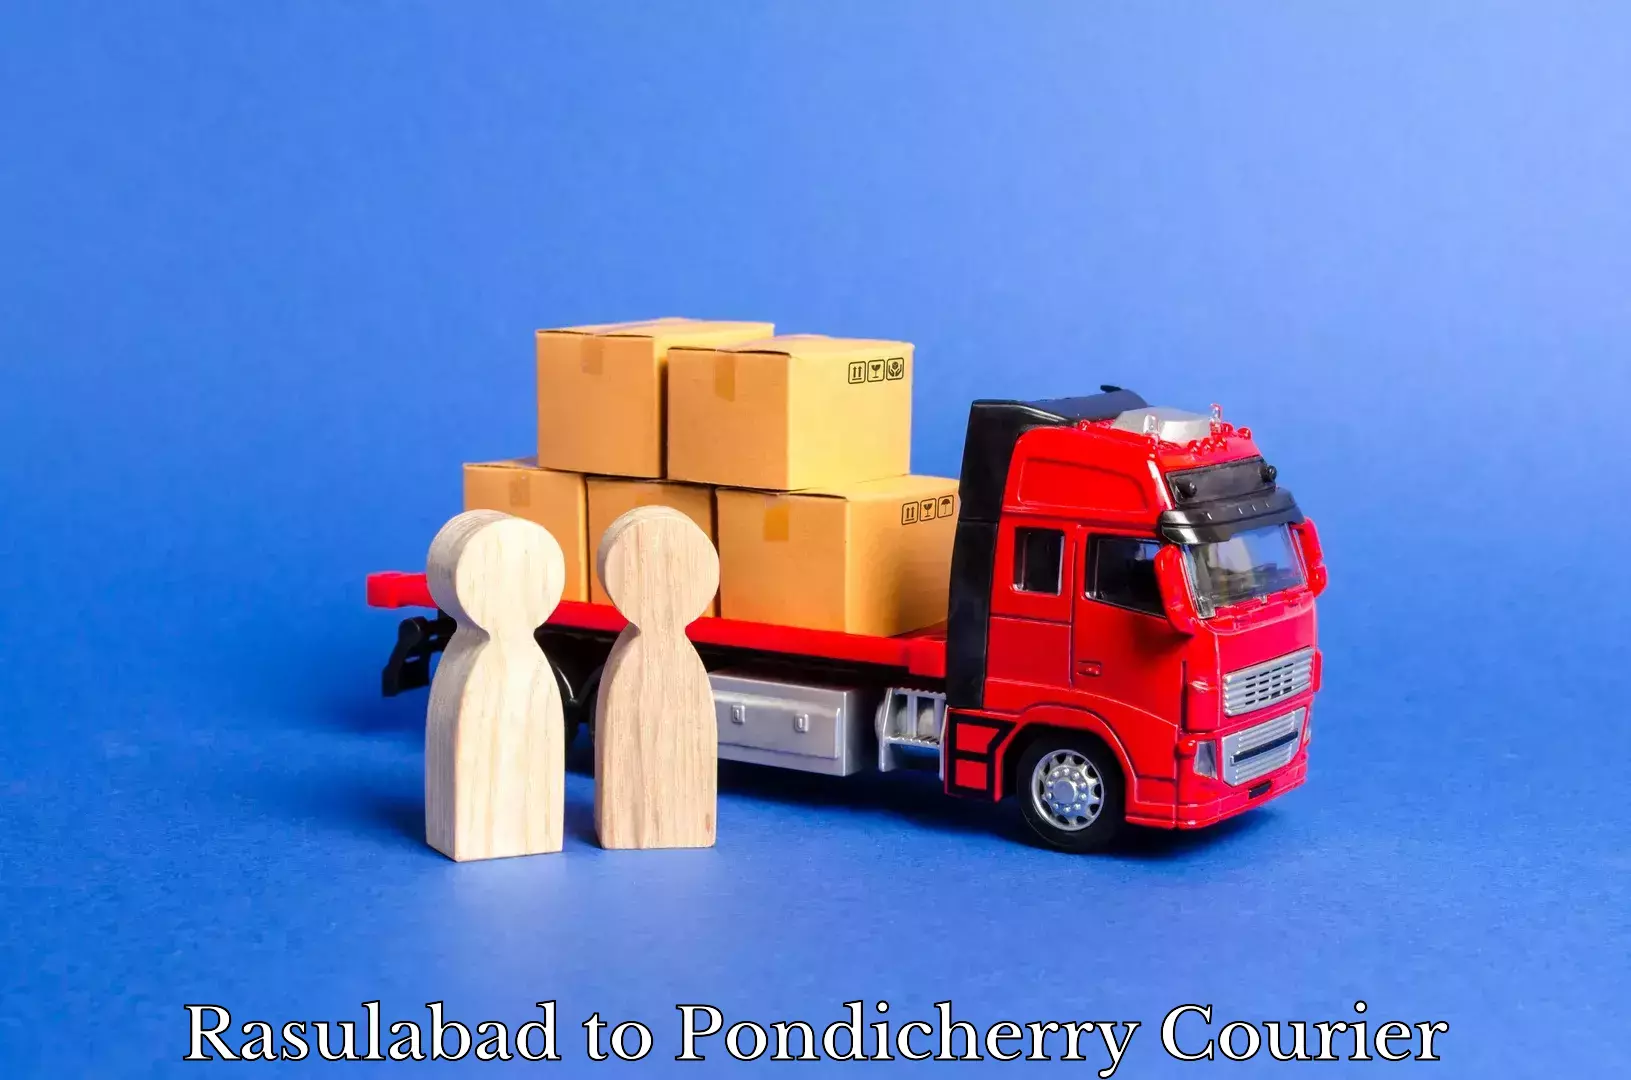 Nationwide delivery network Rasulabad to Pondicherry